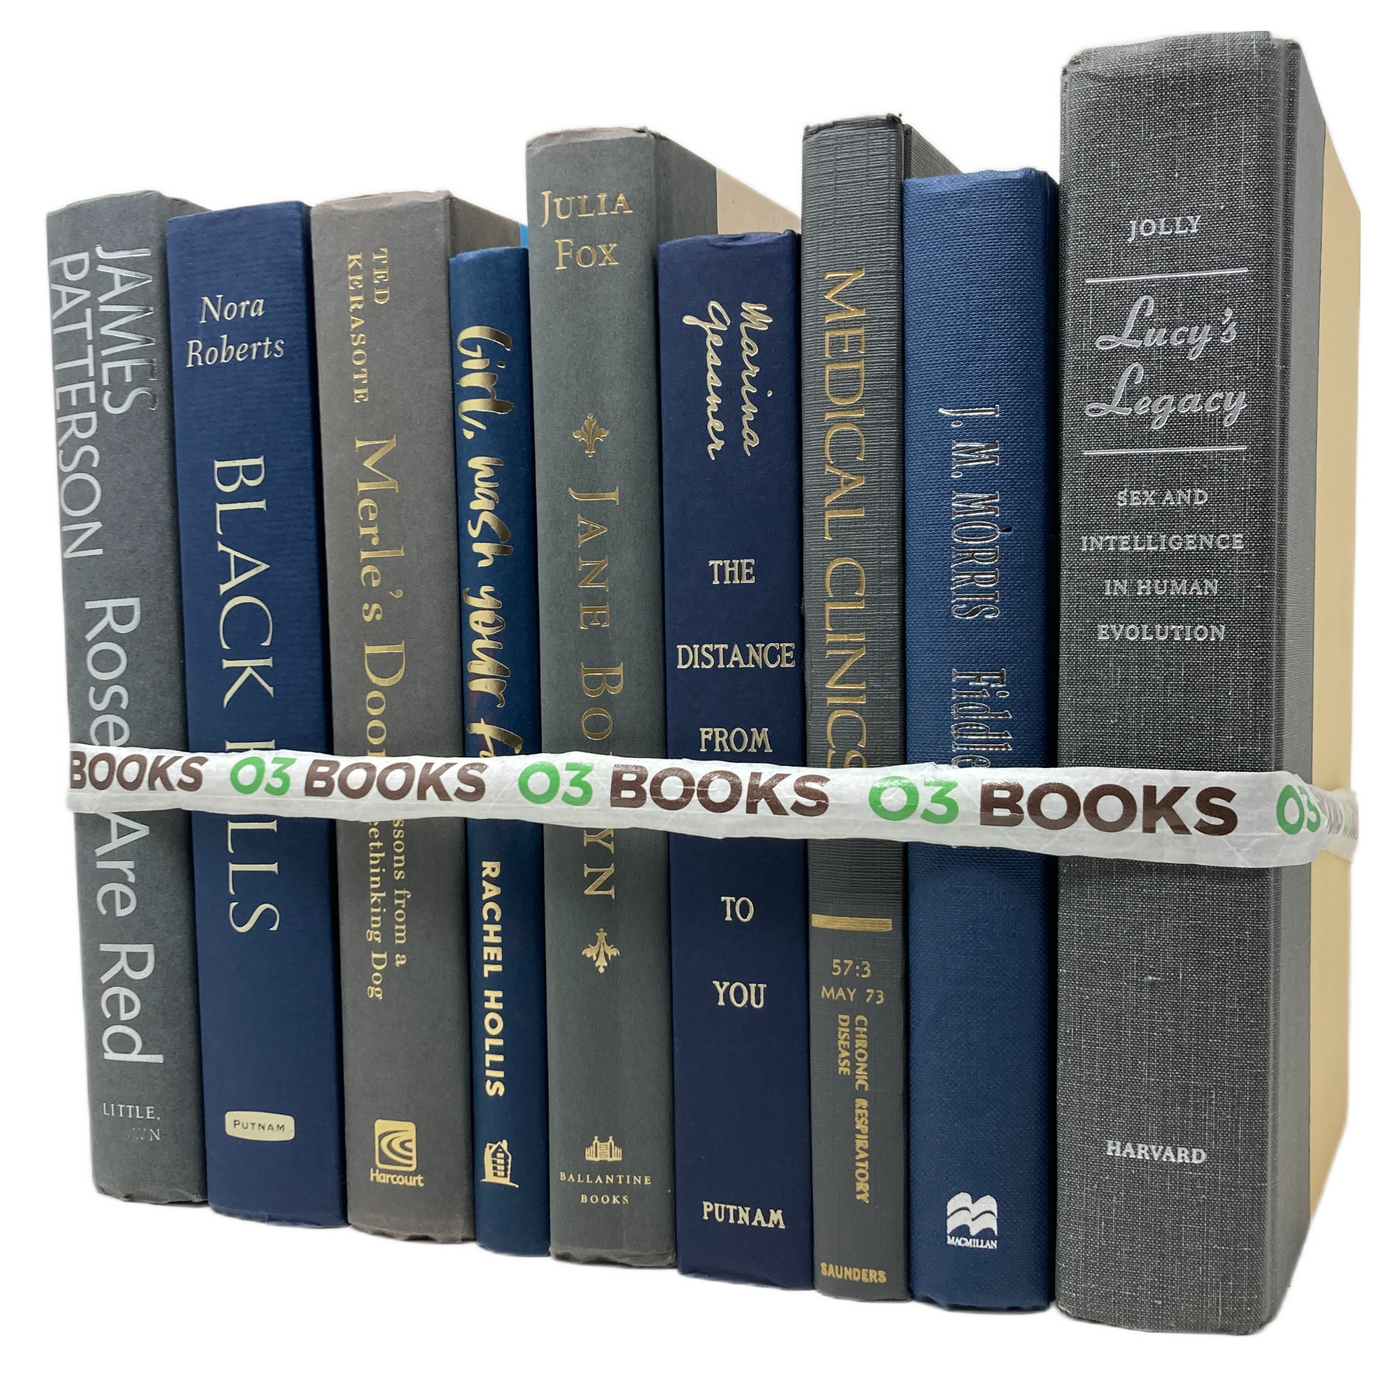 Sleek and Chic Decorative Books Navy Blue and Gray